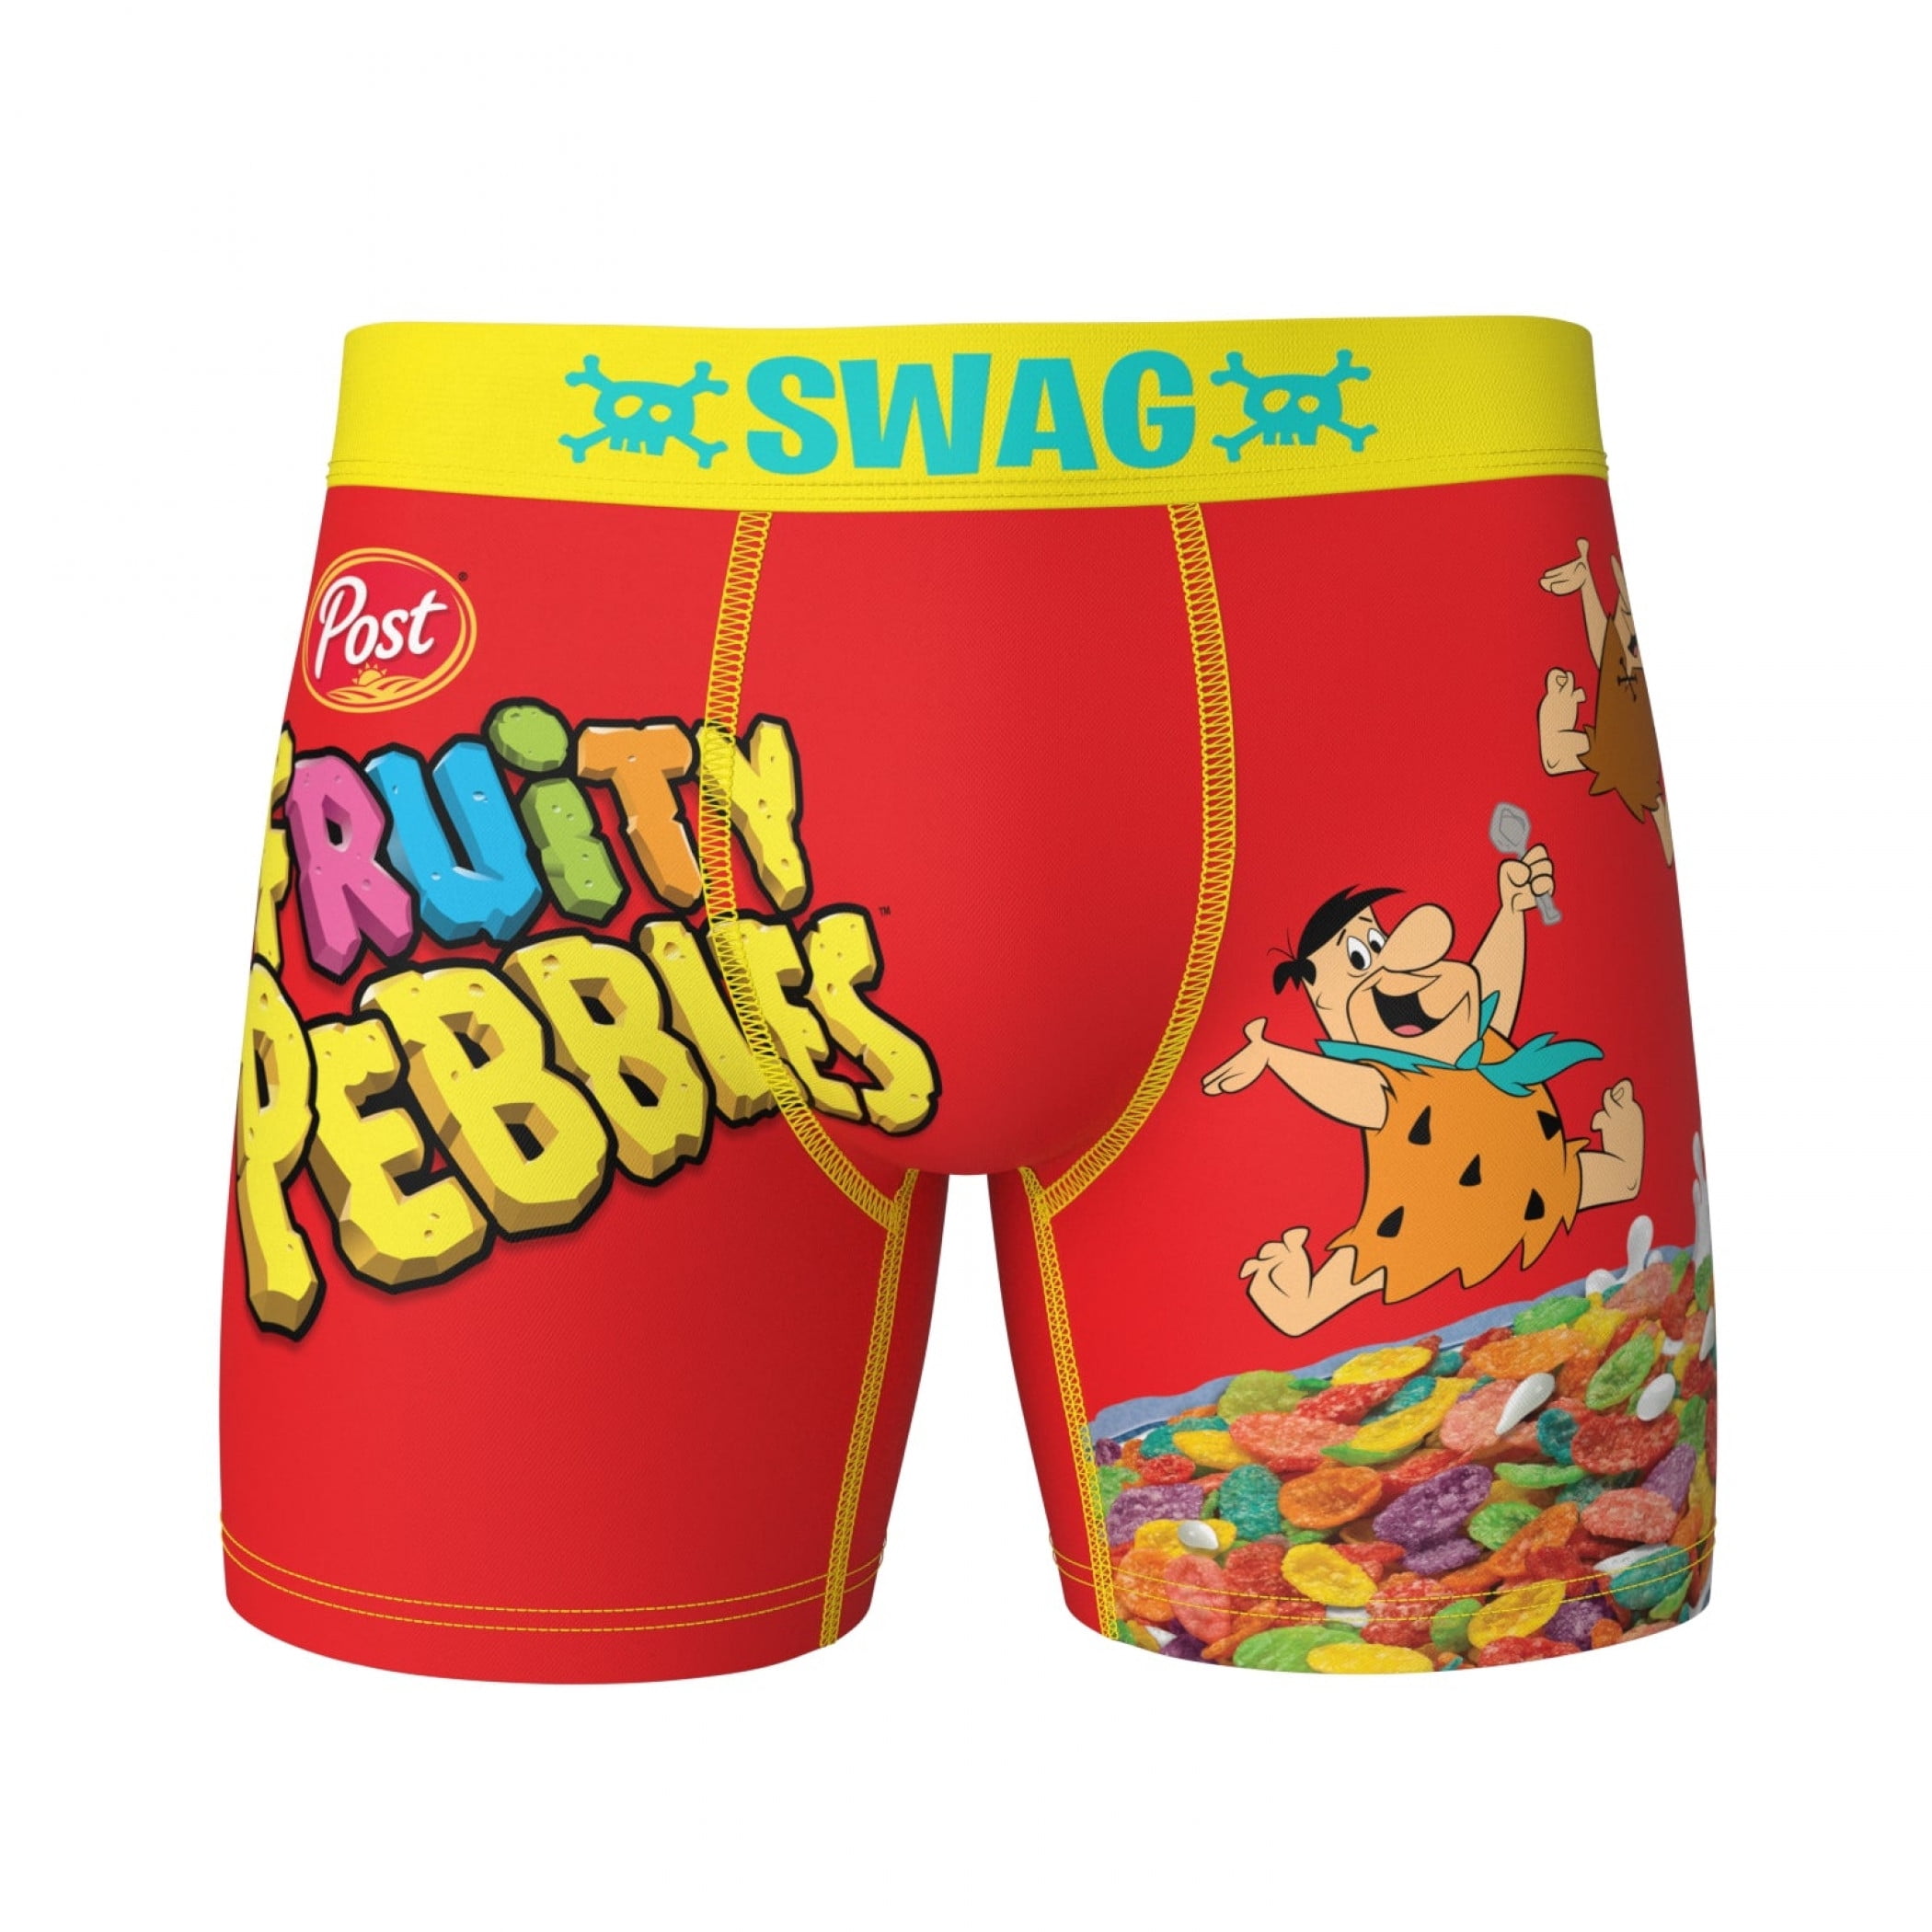 Post Fruity Pebbles Cereal Box Style Swag Boxer Briefs-XXLarge (44